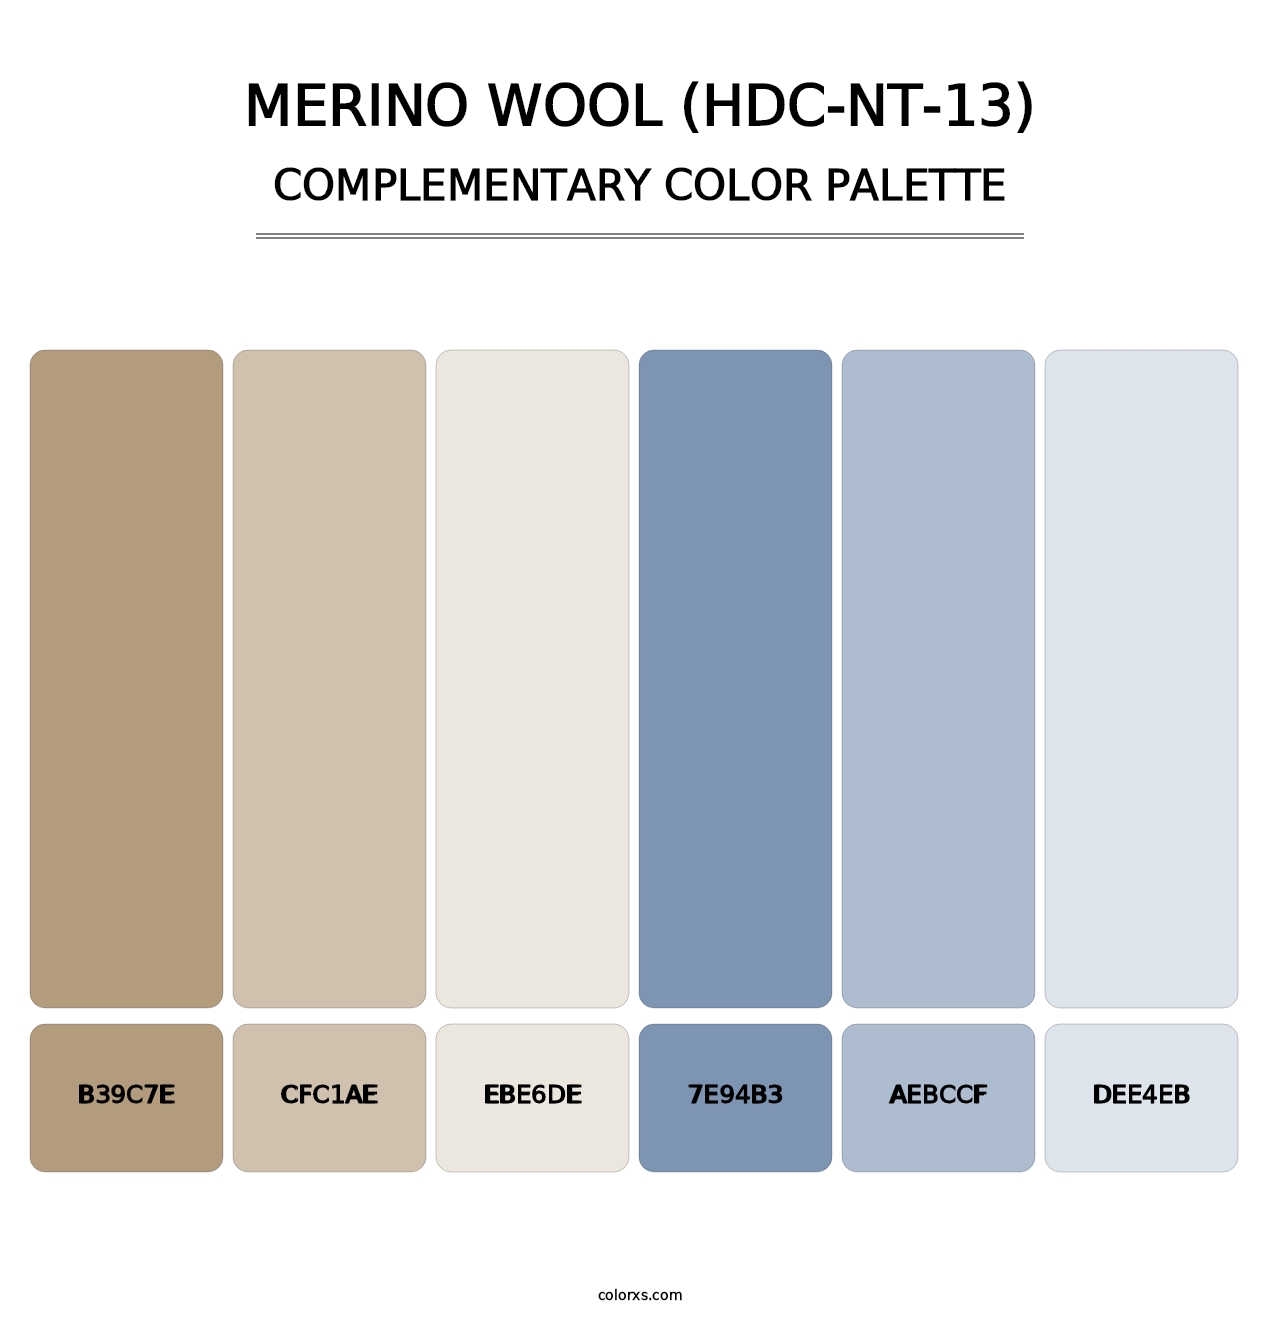 Merino Wool (HDC-NT-13) - Complementary Color Palette